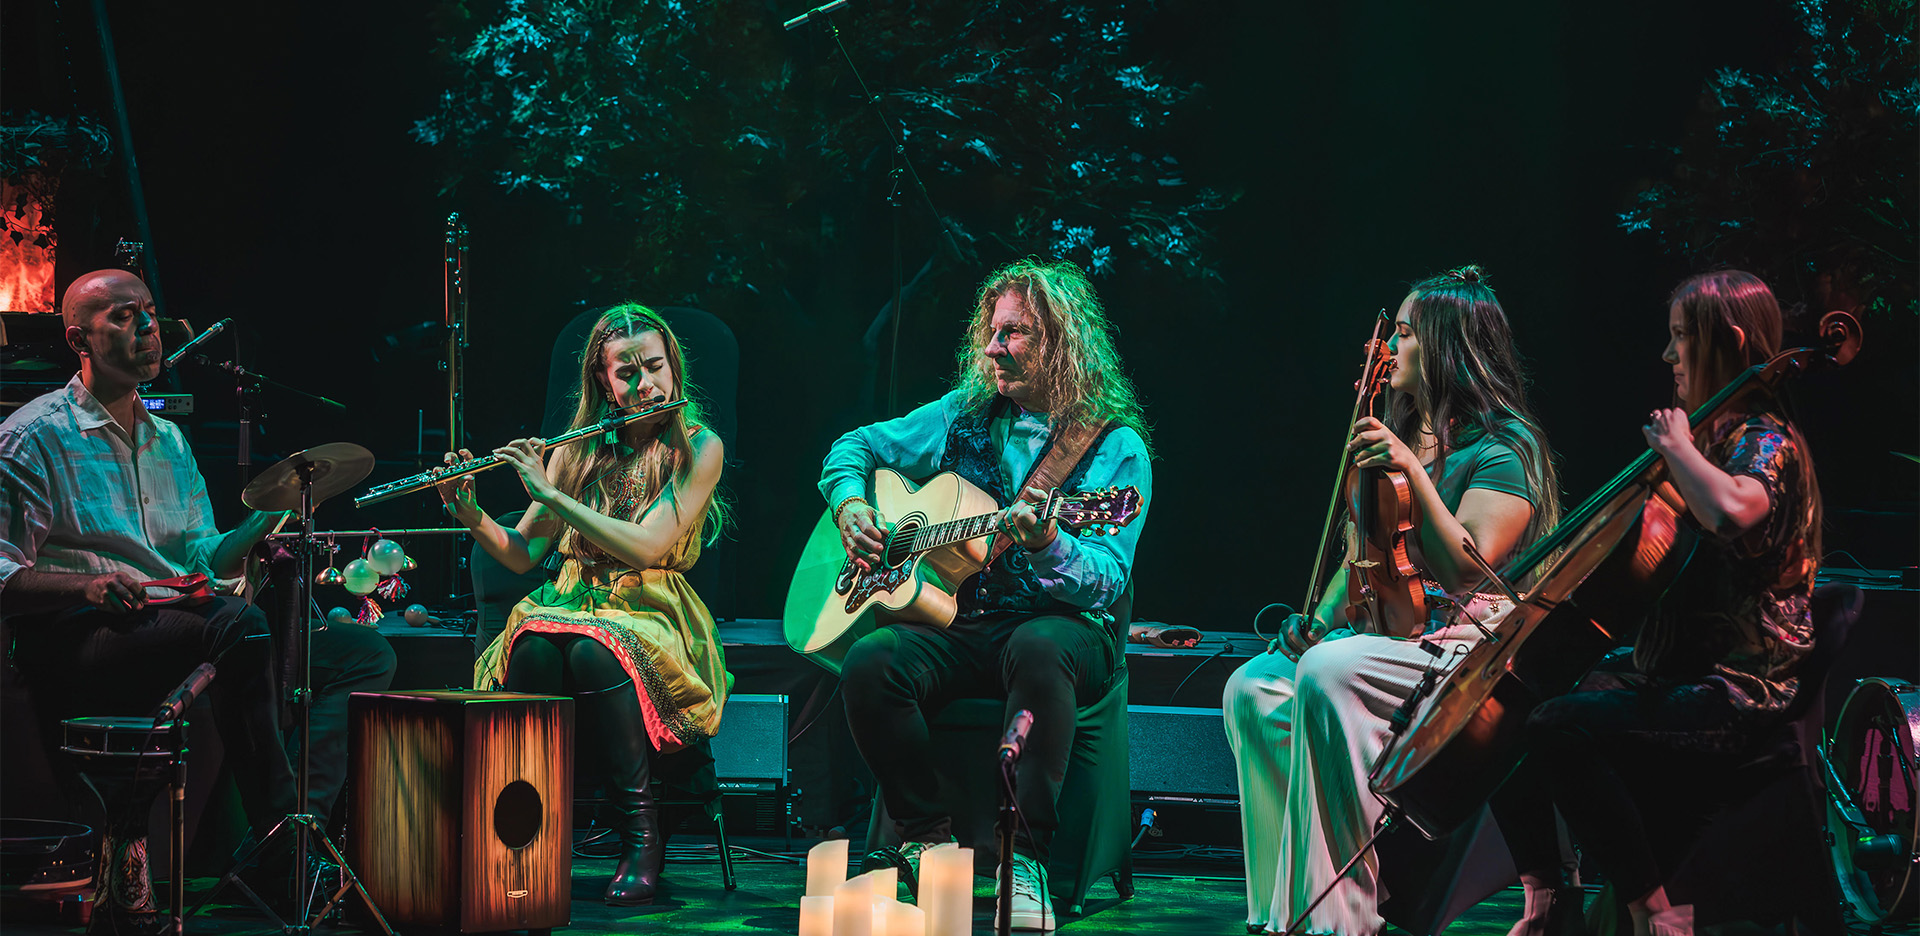 A Winter’s Eve with David Arkenstone and Friends